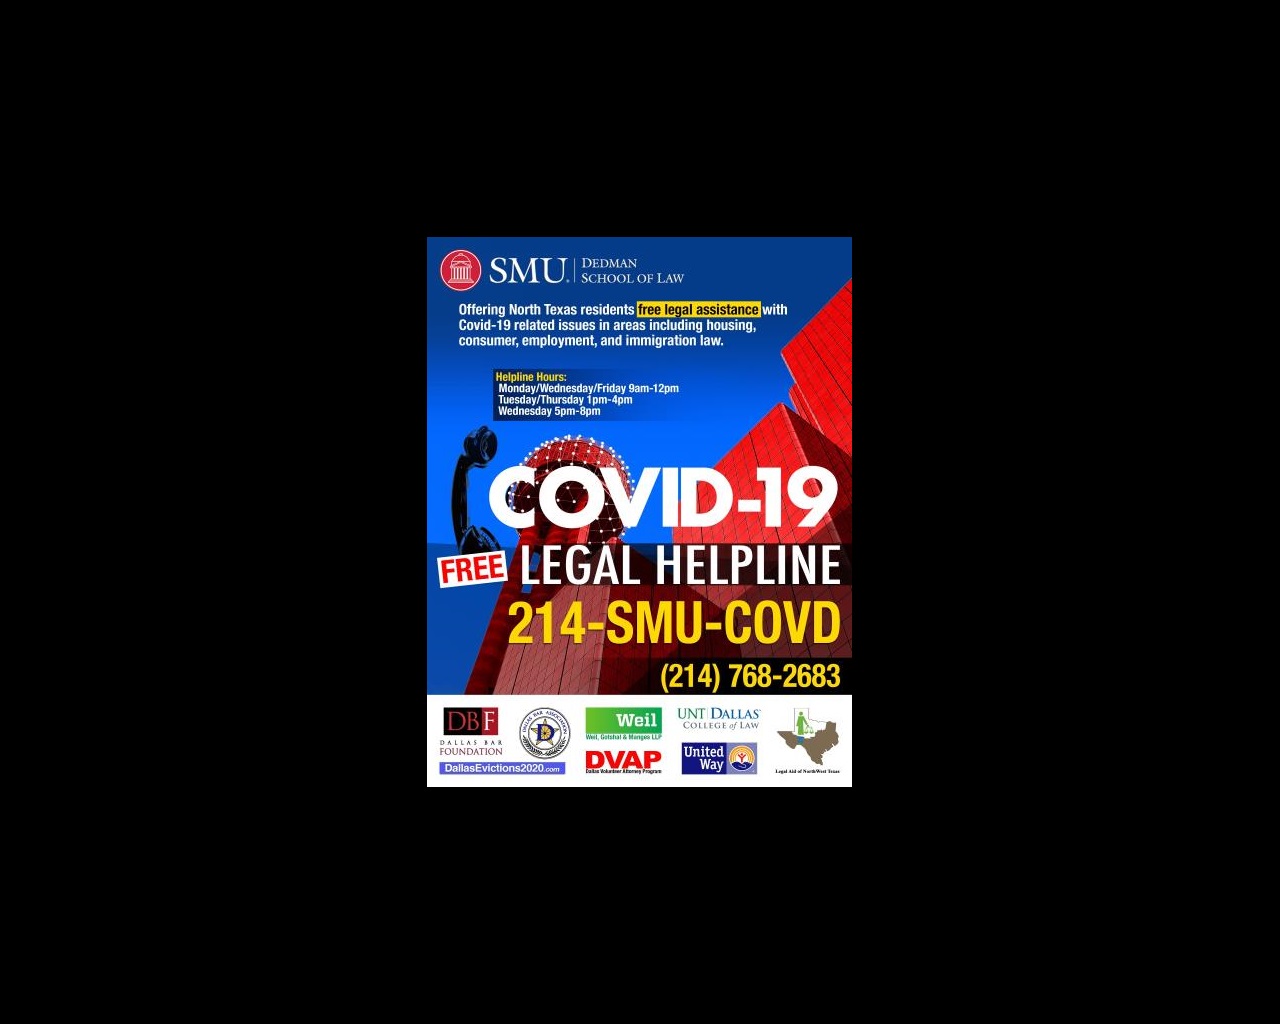 Smu Law Free Helpline For Covid 19 Related Legal Issues Smu